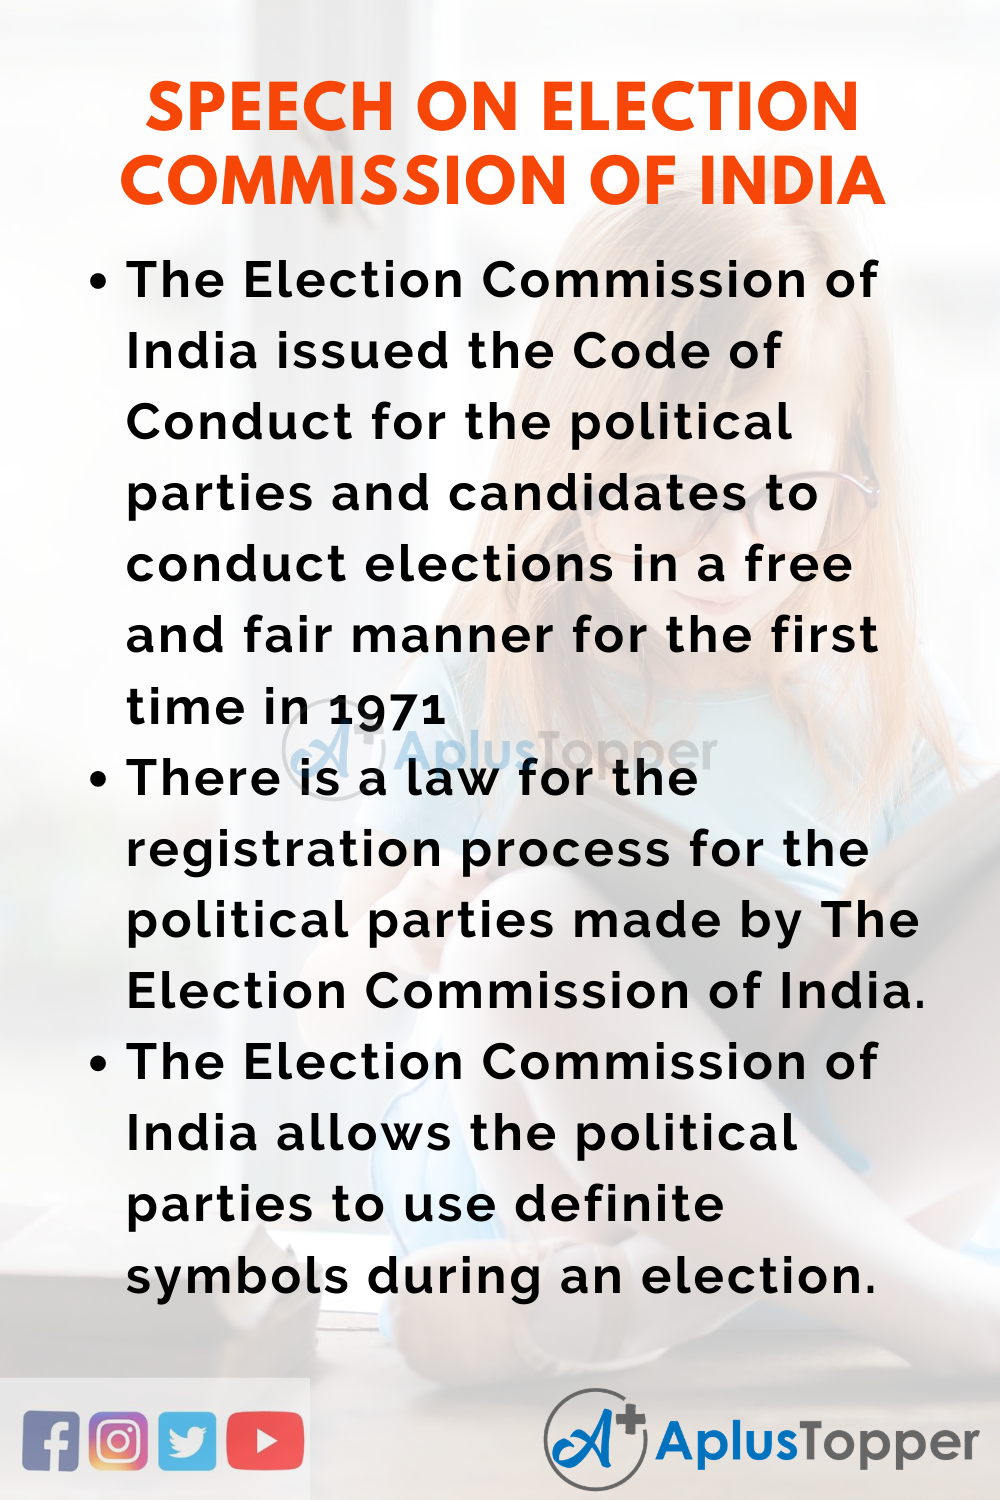 Short Speech On Election Commission Of India 150 Words In English